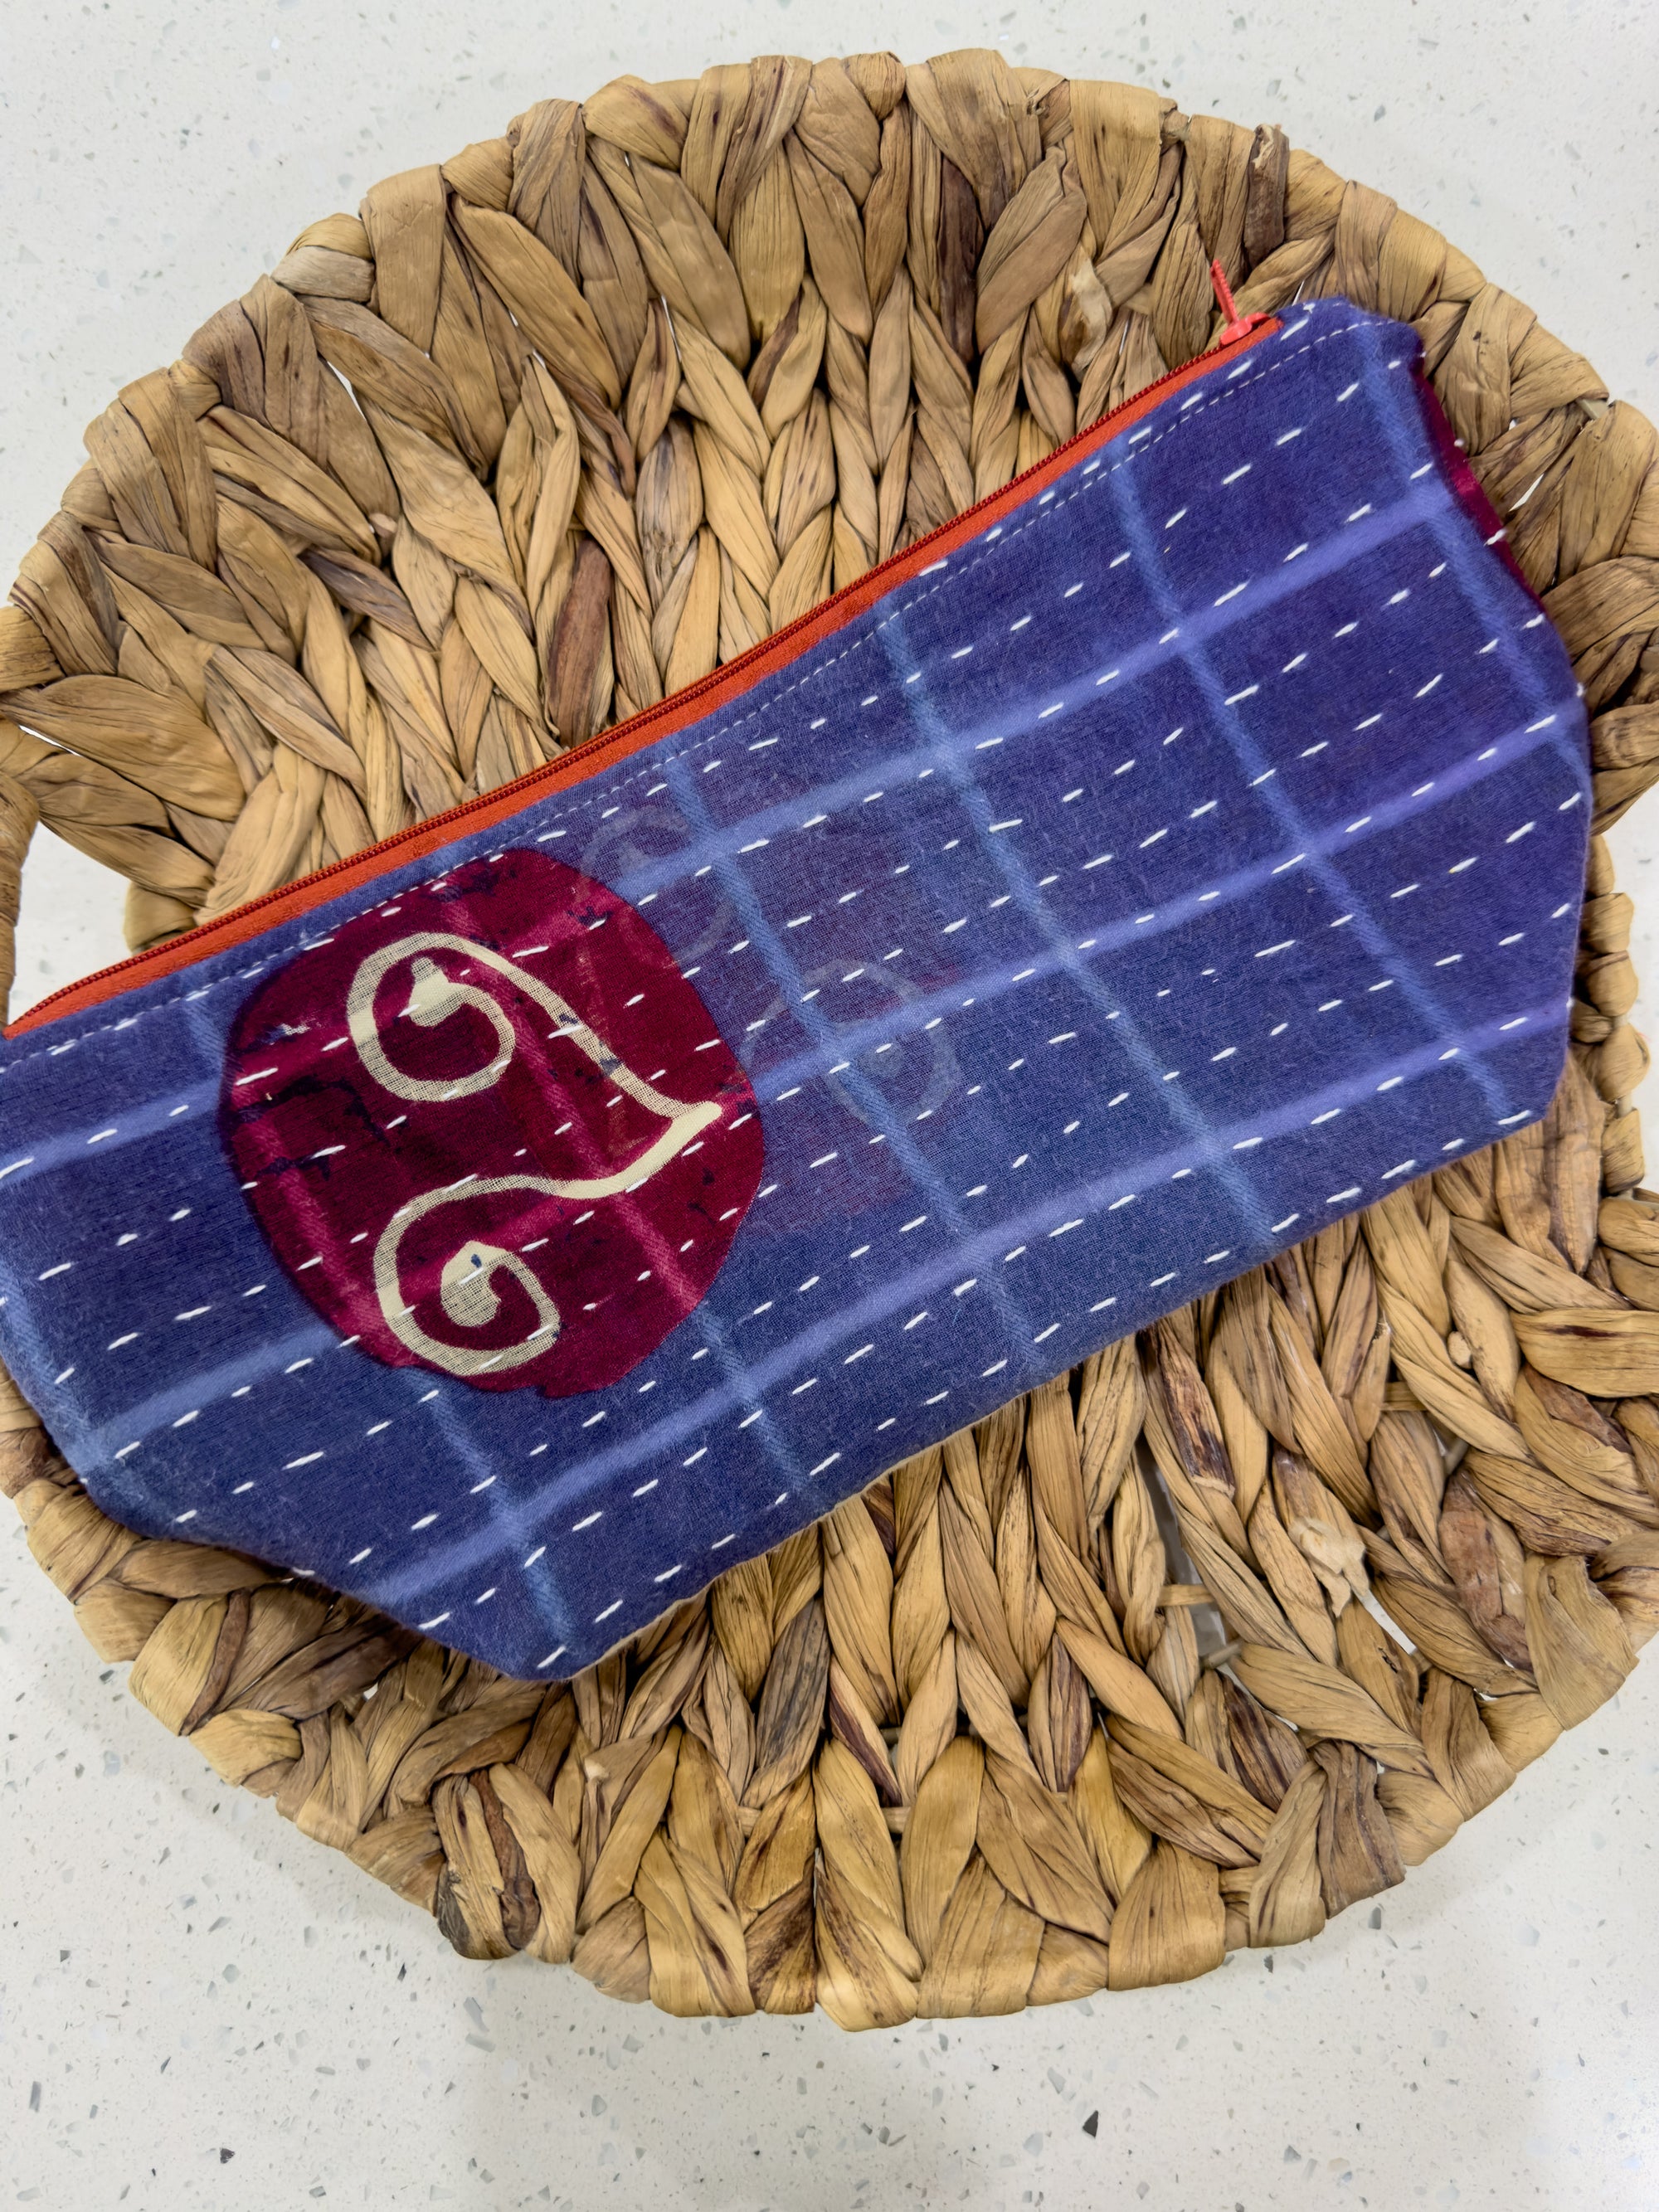 a blue and red purse sitting on top of a woven basket